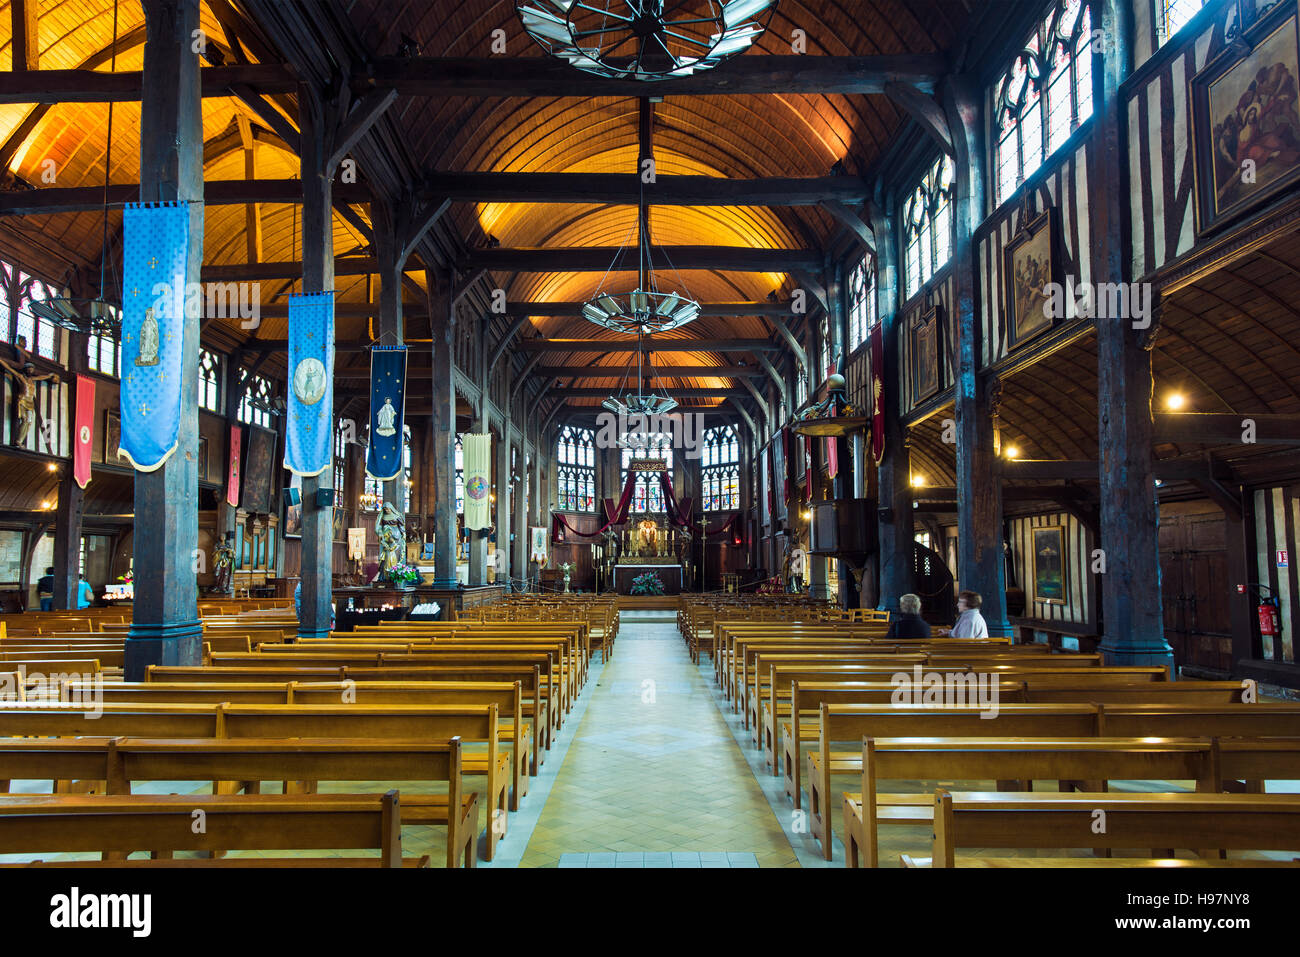 The interior of Saint-Catherine's Church in Honfleur on the Côte Fleurie in Normandy, France Stock Photo